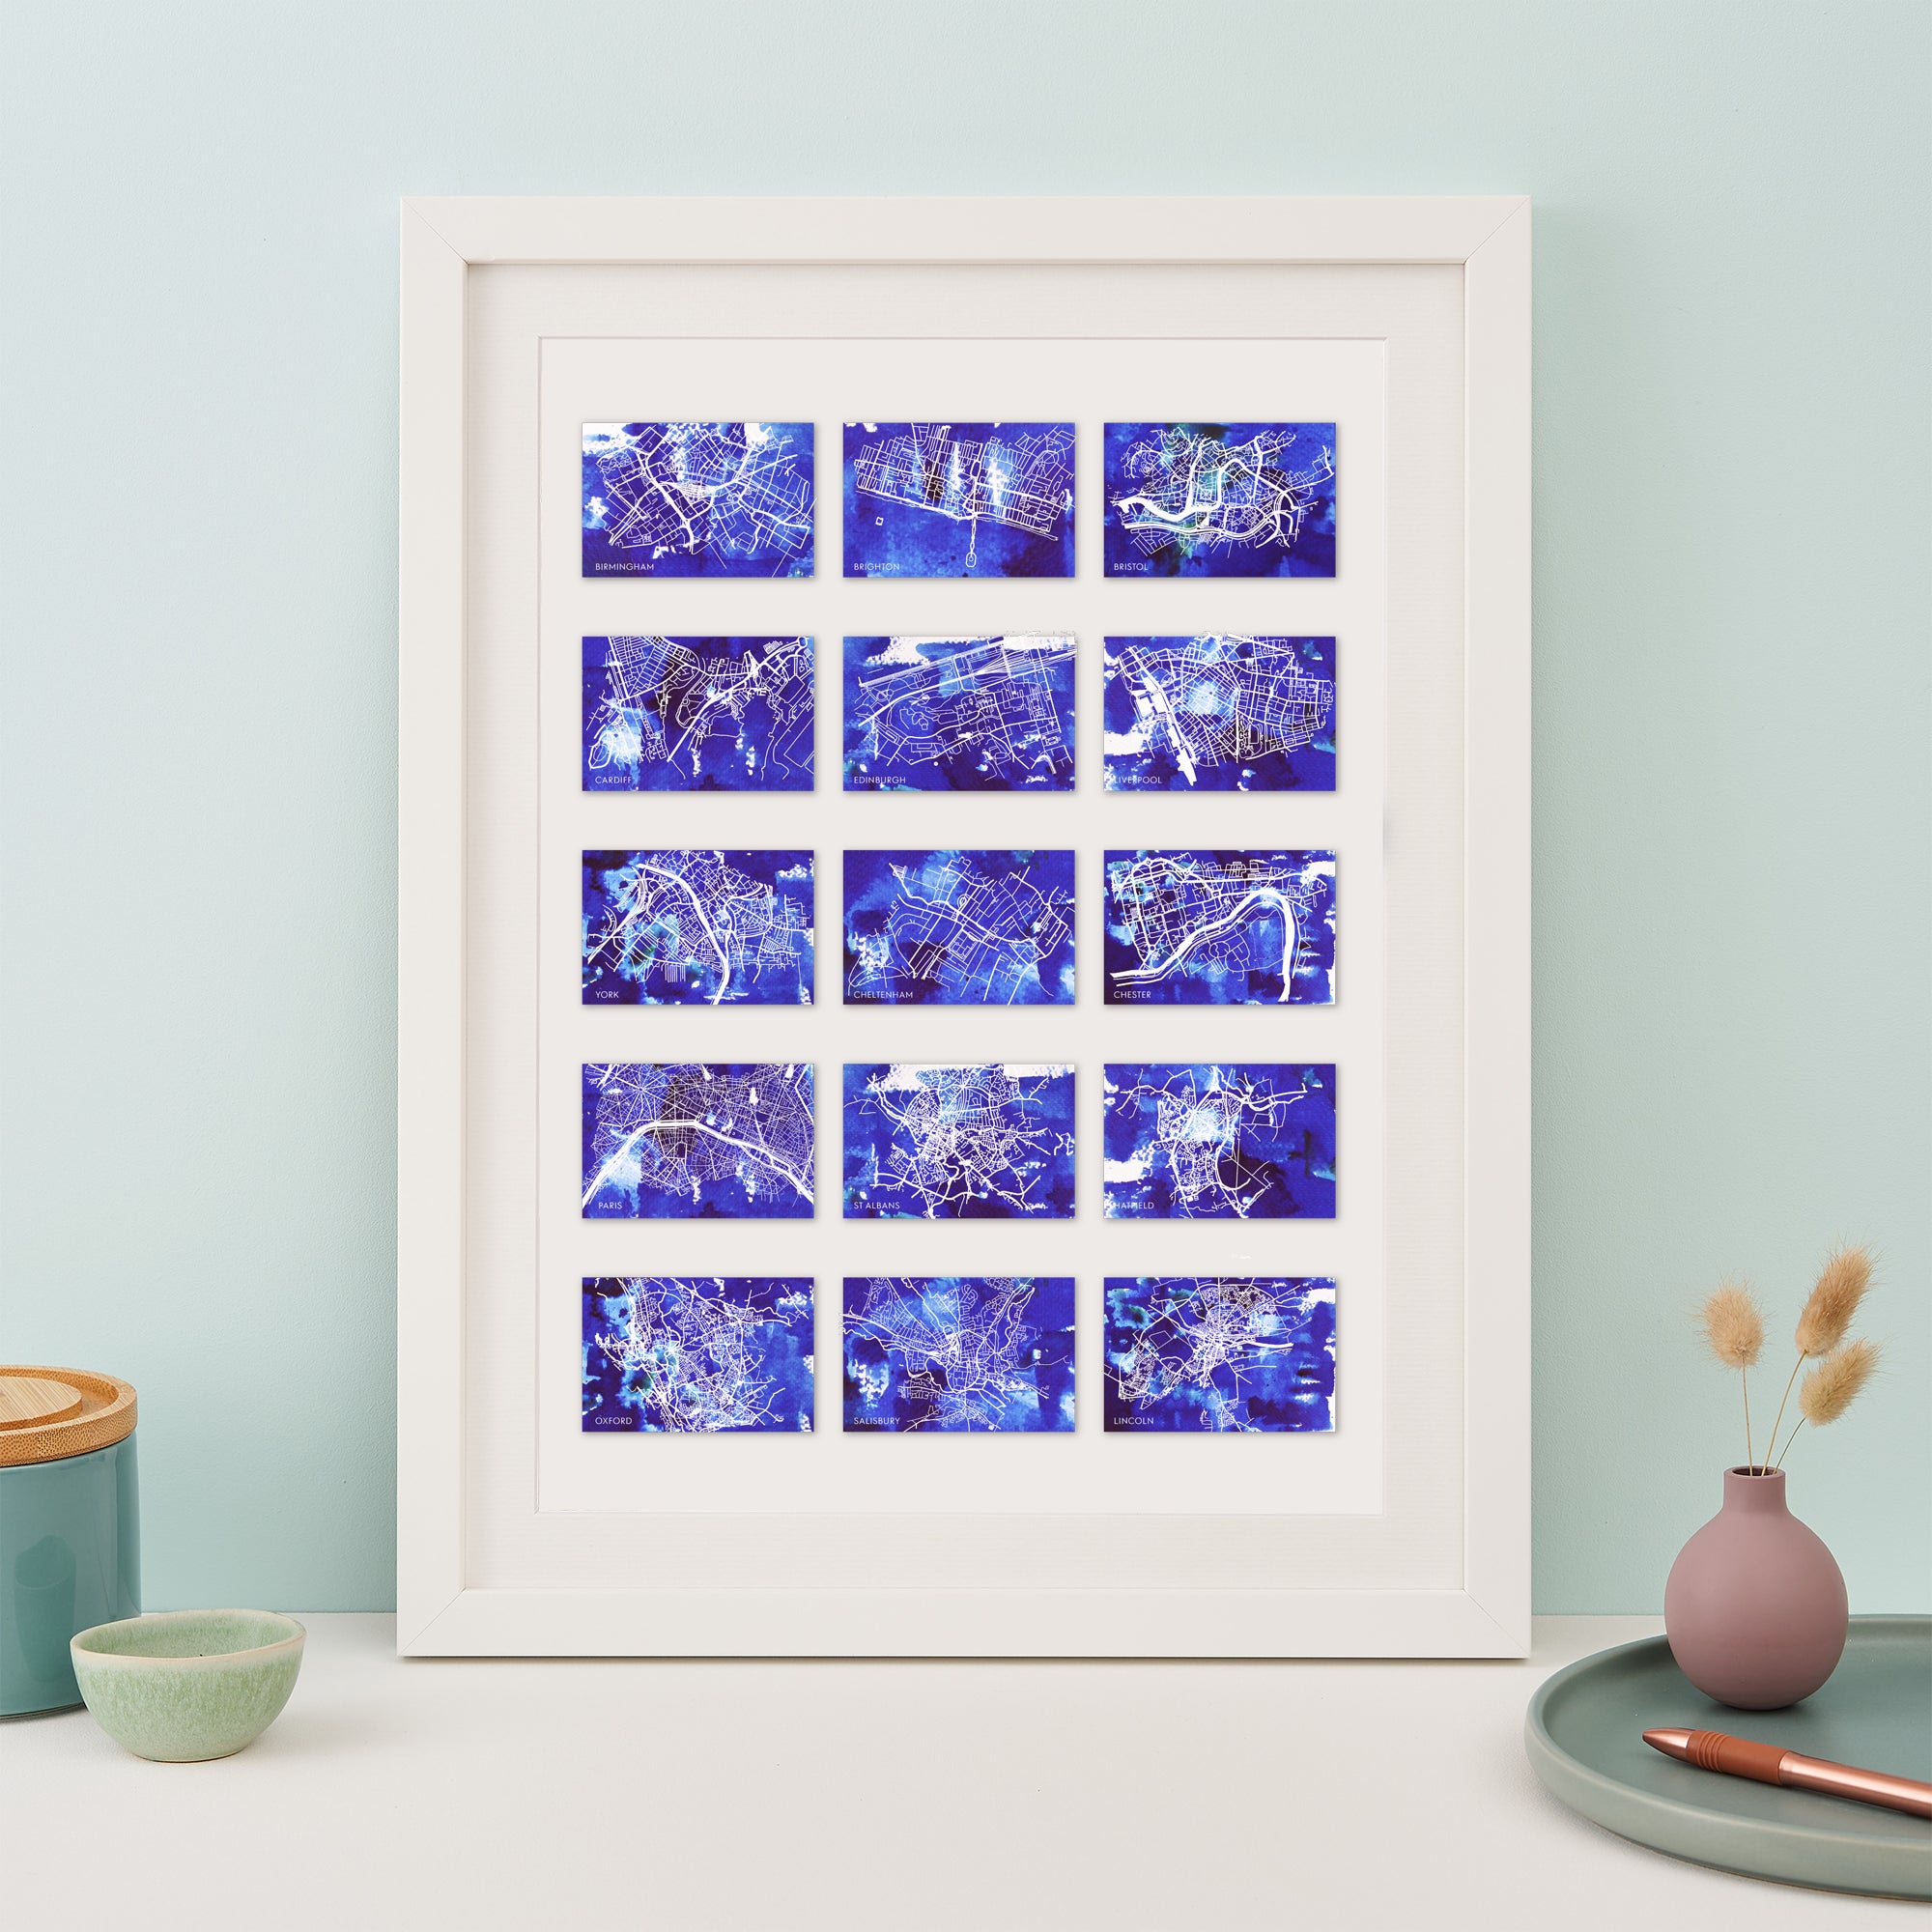 framed print with 15 small blue maps of different locations